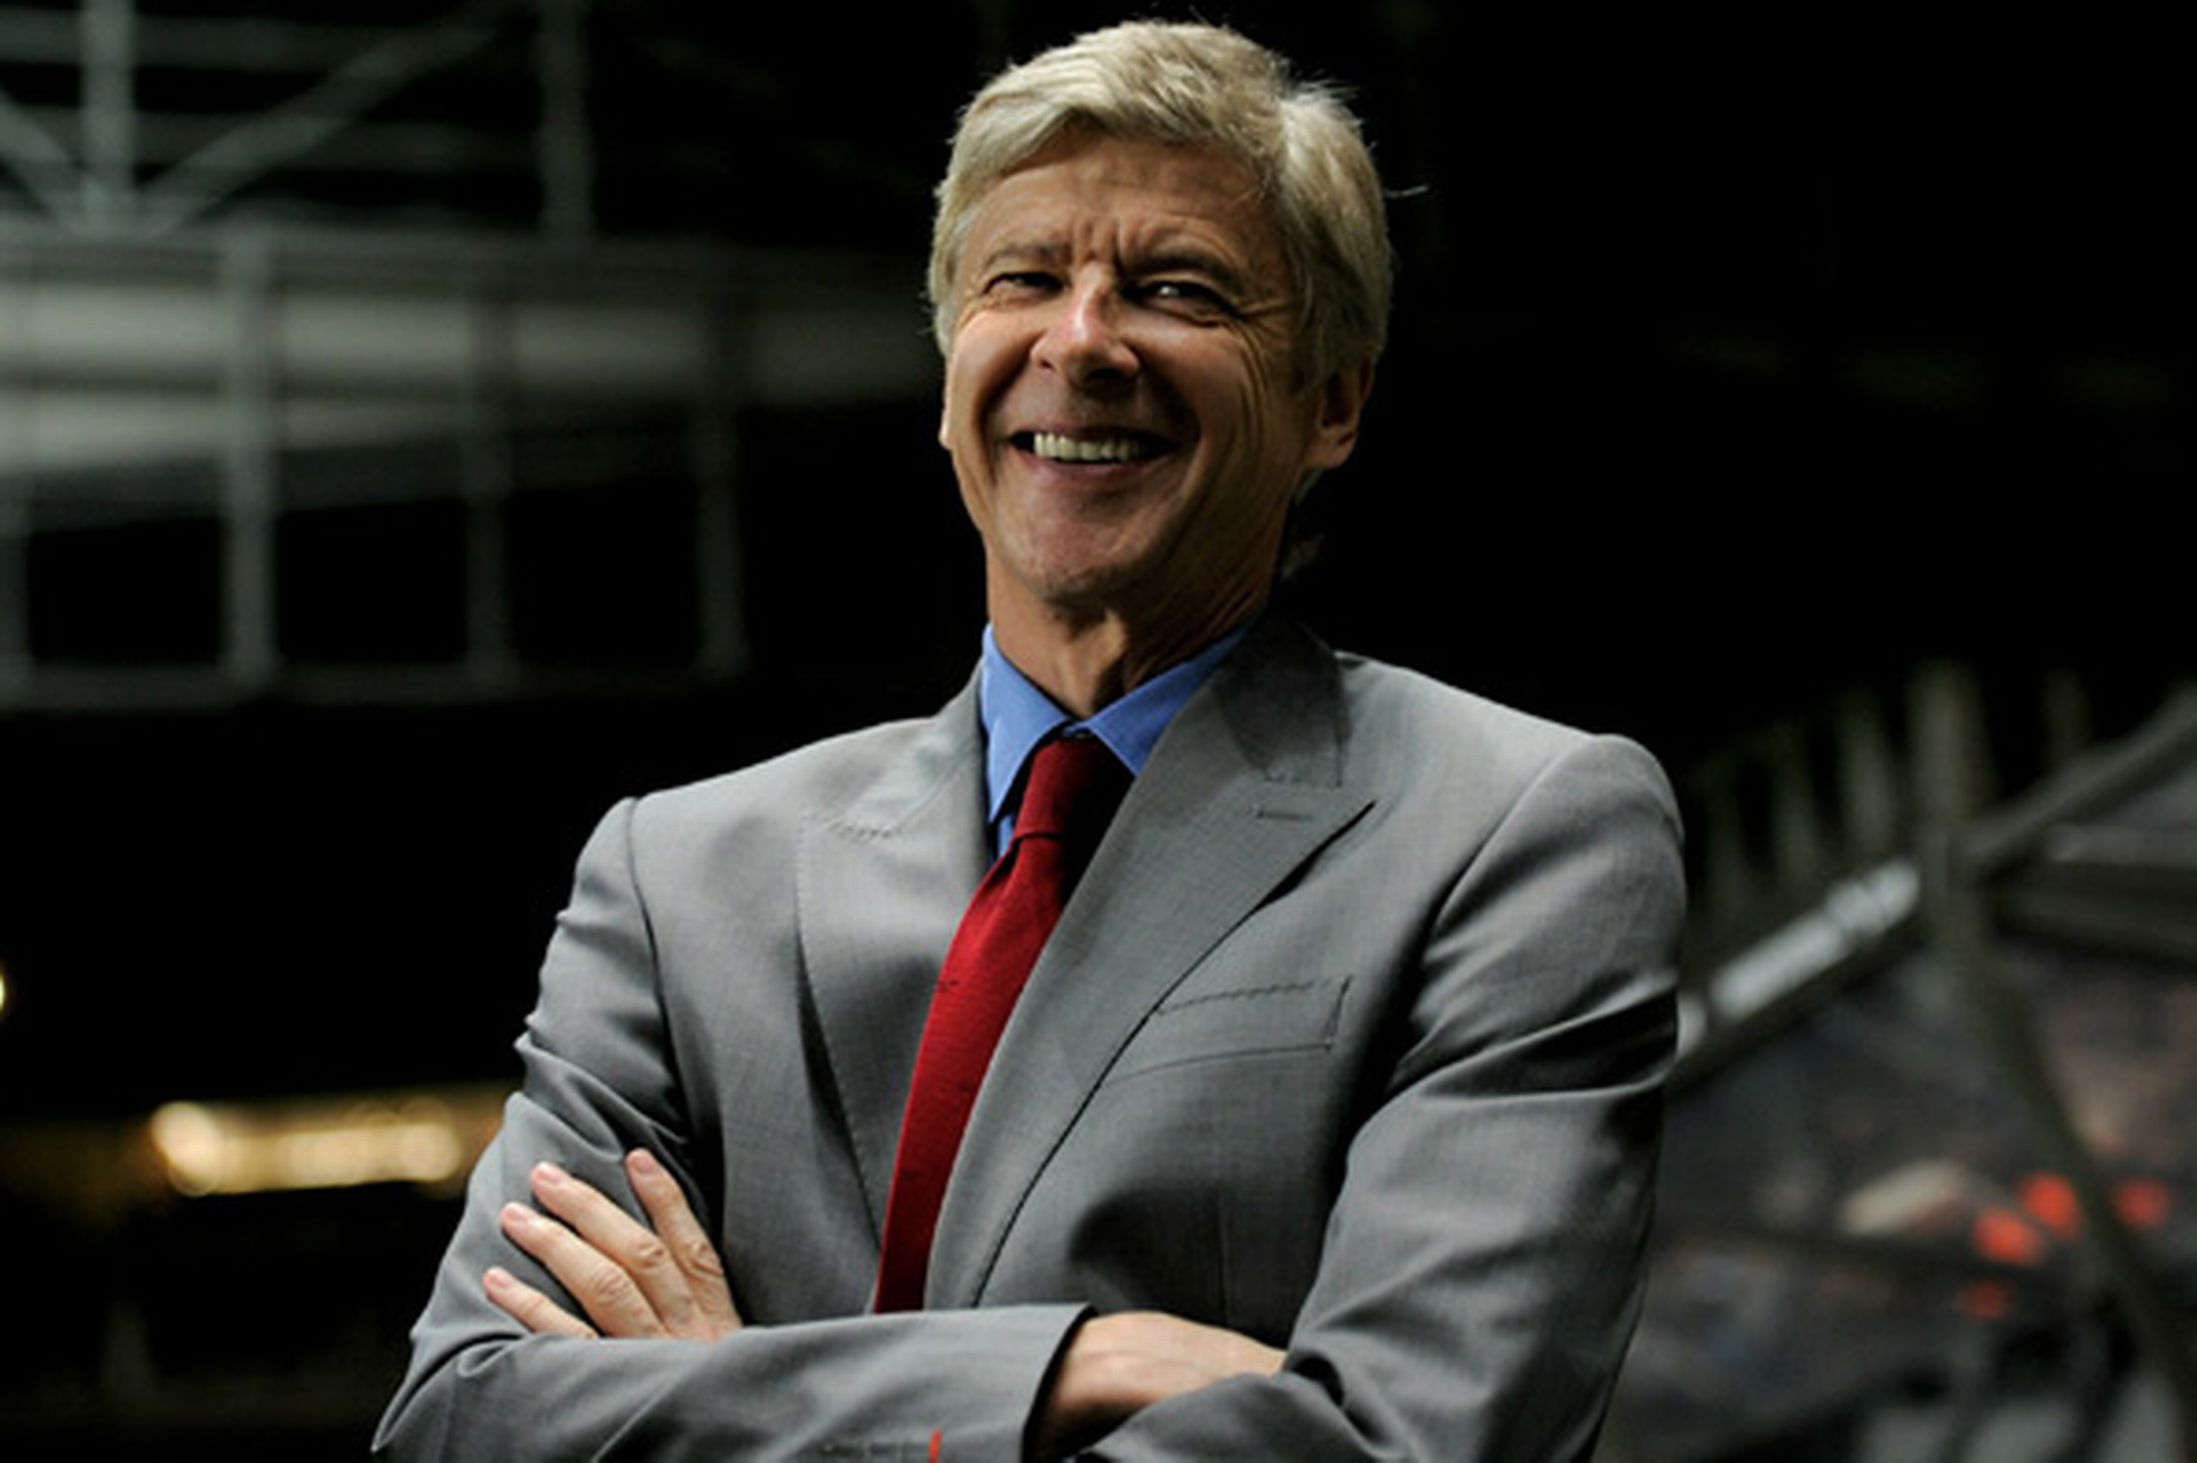 arsene-wenger-manages-a-smile-pic-getty-89992389.jpg